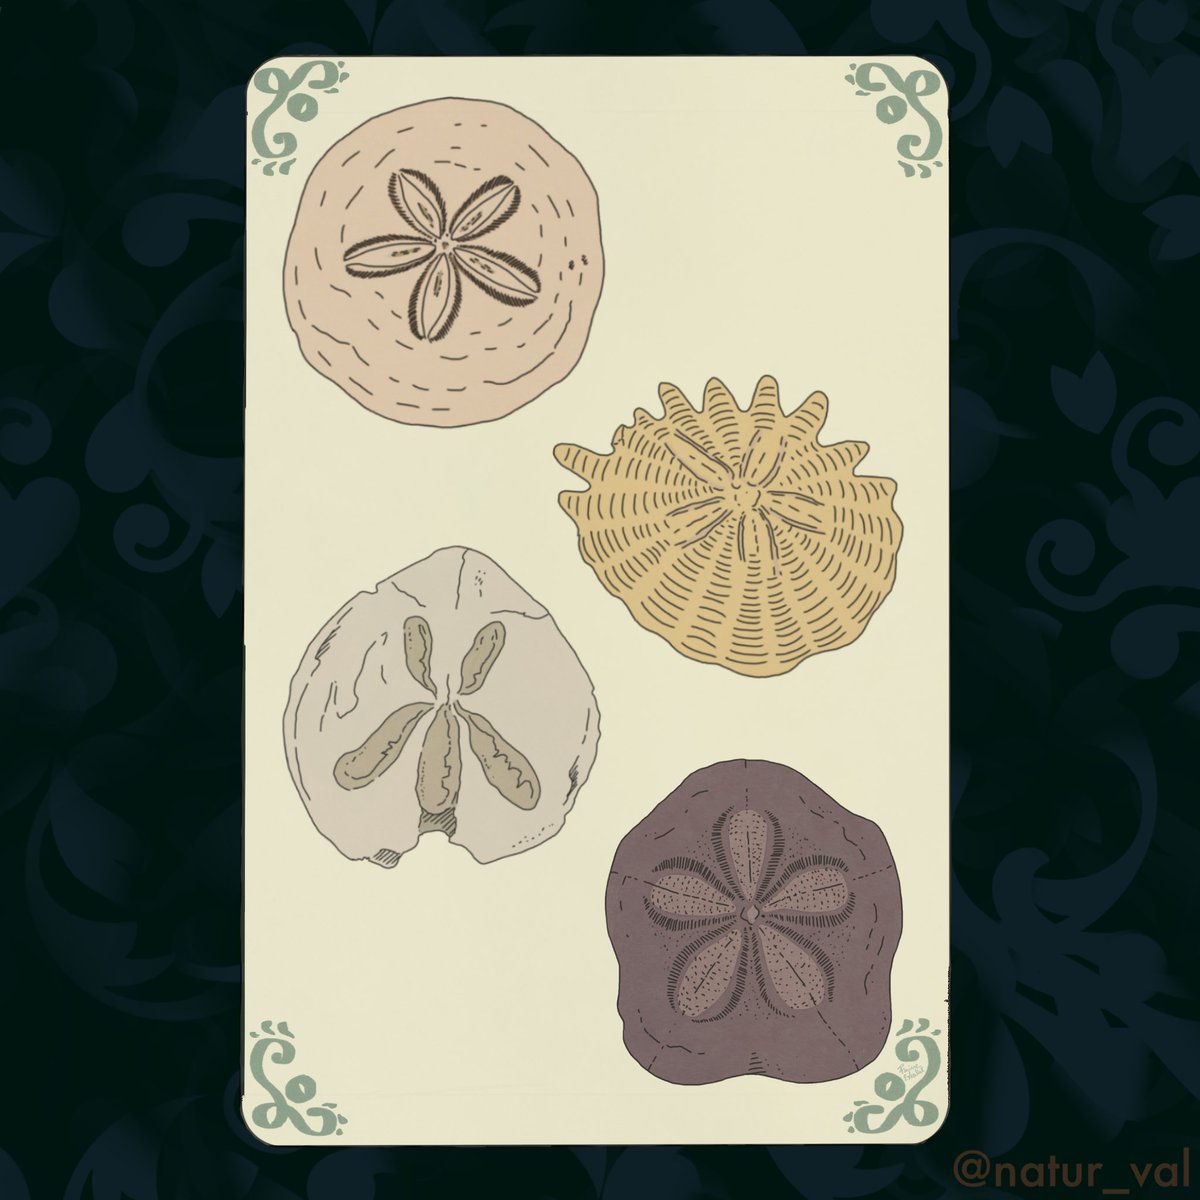 Tarots Before Time - Deniers. The suit of Pentacles. I chose “sand dollars” fossils, i.e. echinoids of the Dendrasteridae family characterized by a rounded and flattened shape that resembles a coin. P.S. There are actually a couple of interlopers from other genres. 4: security